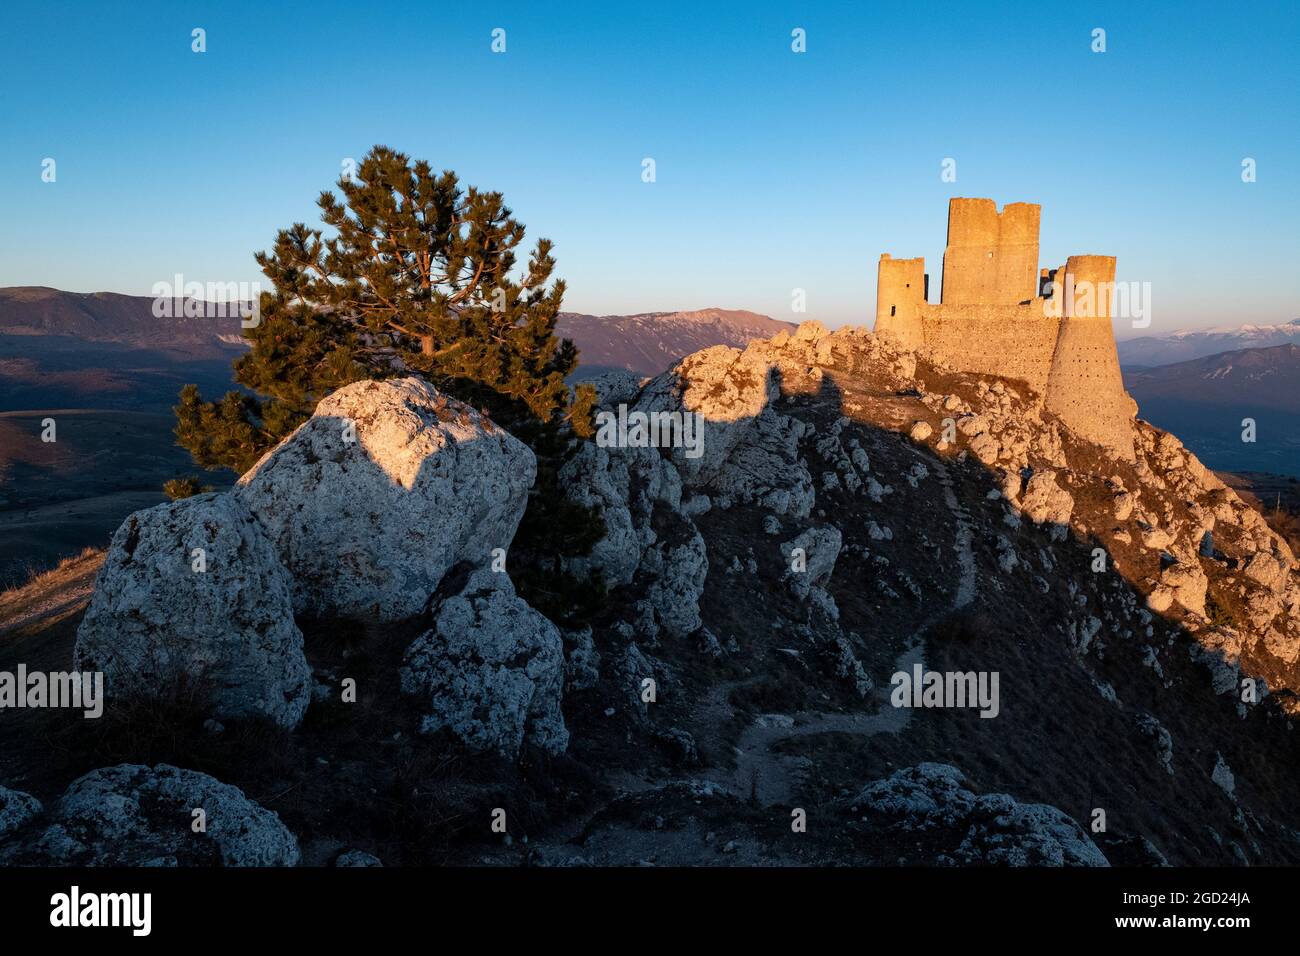 geography / travel, Italy, Abruzzo, Rocca Calascio, evening mood, Abruzzischer Appennin, Abruzzo, ADDITIONAL-RIGHTS-CLEARANCE-INFO-NOT-AVAILABLE Stock Photo